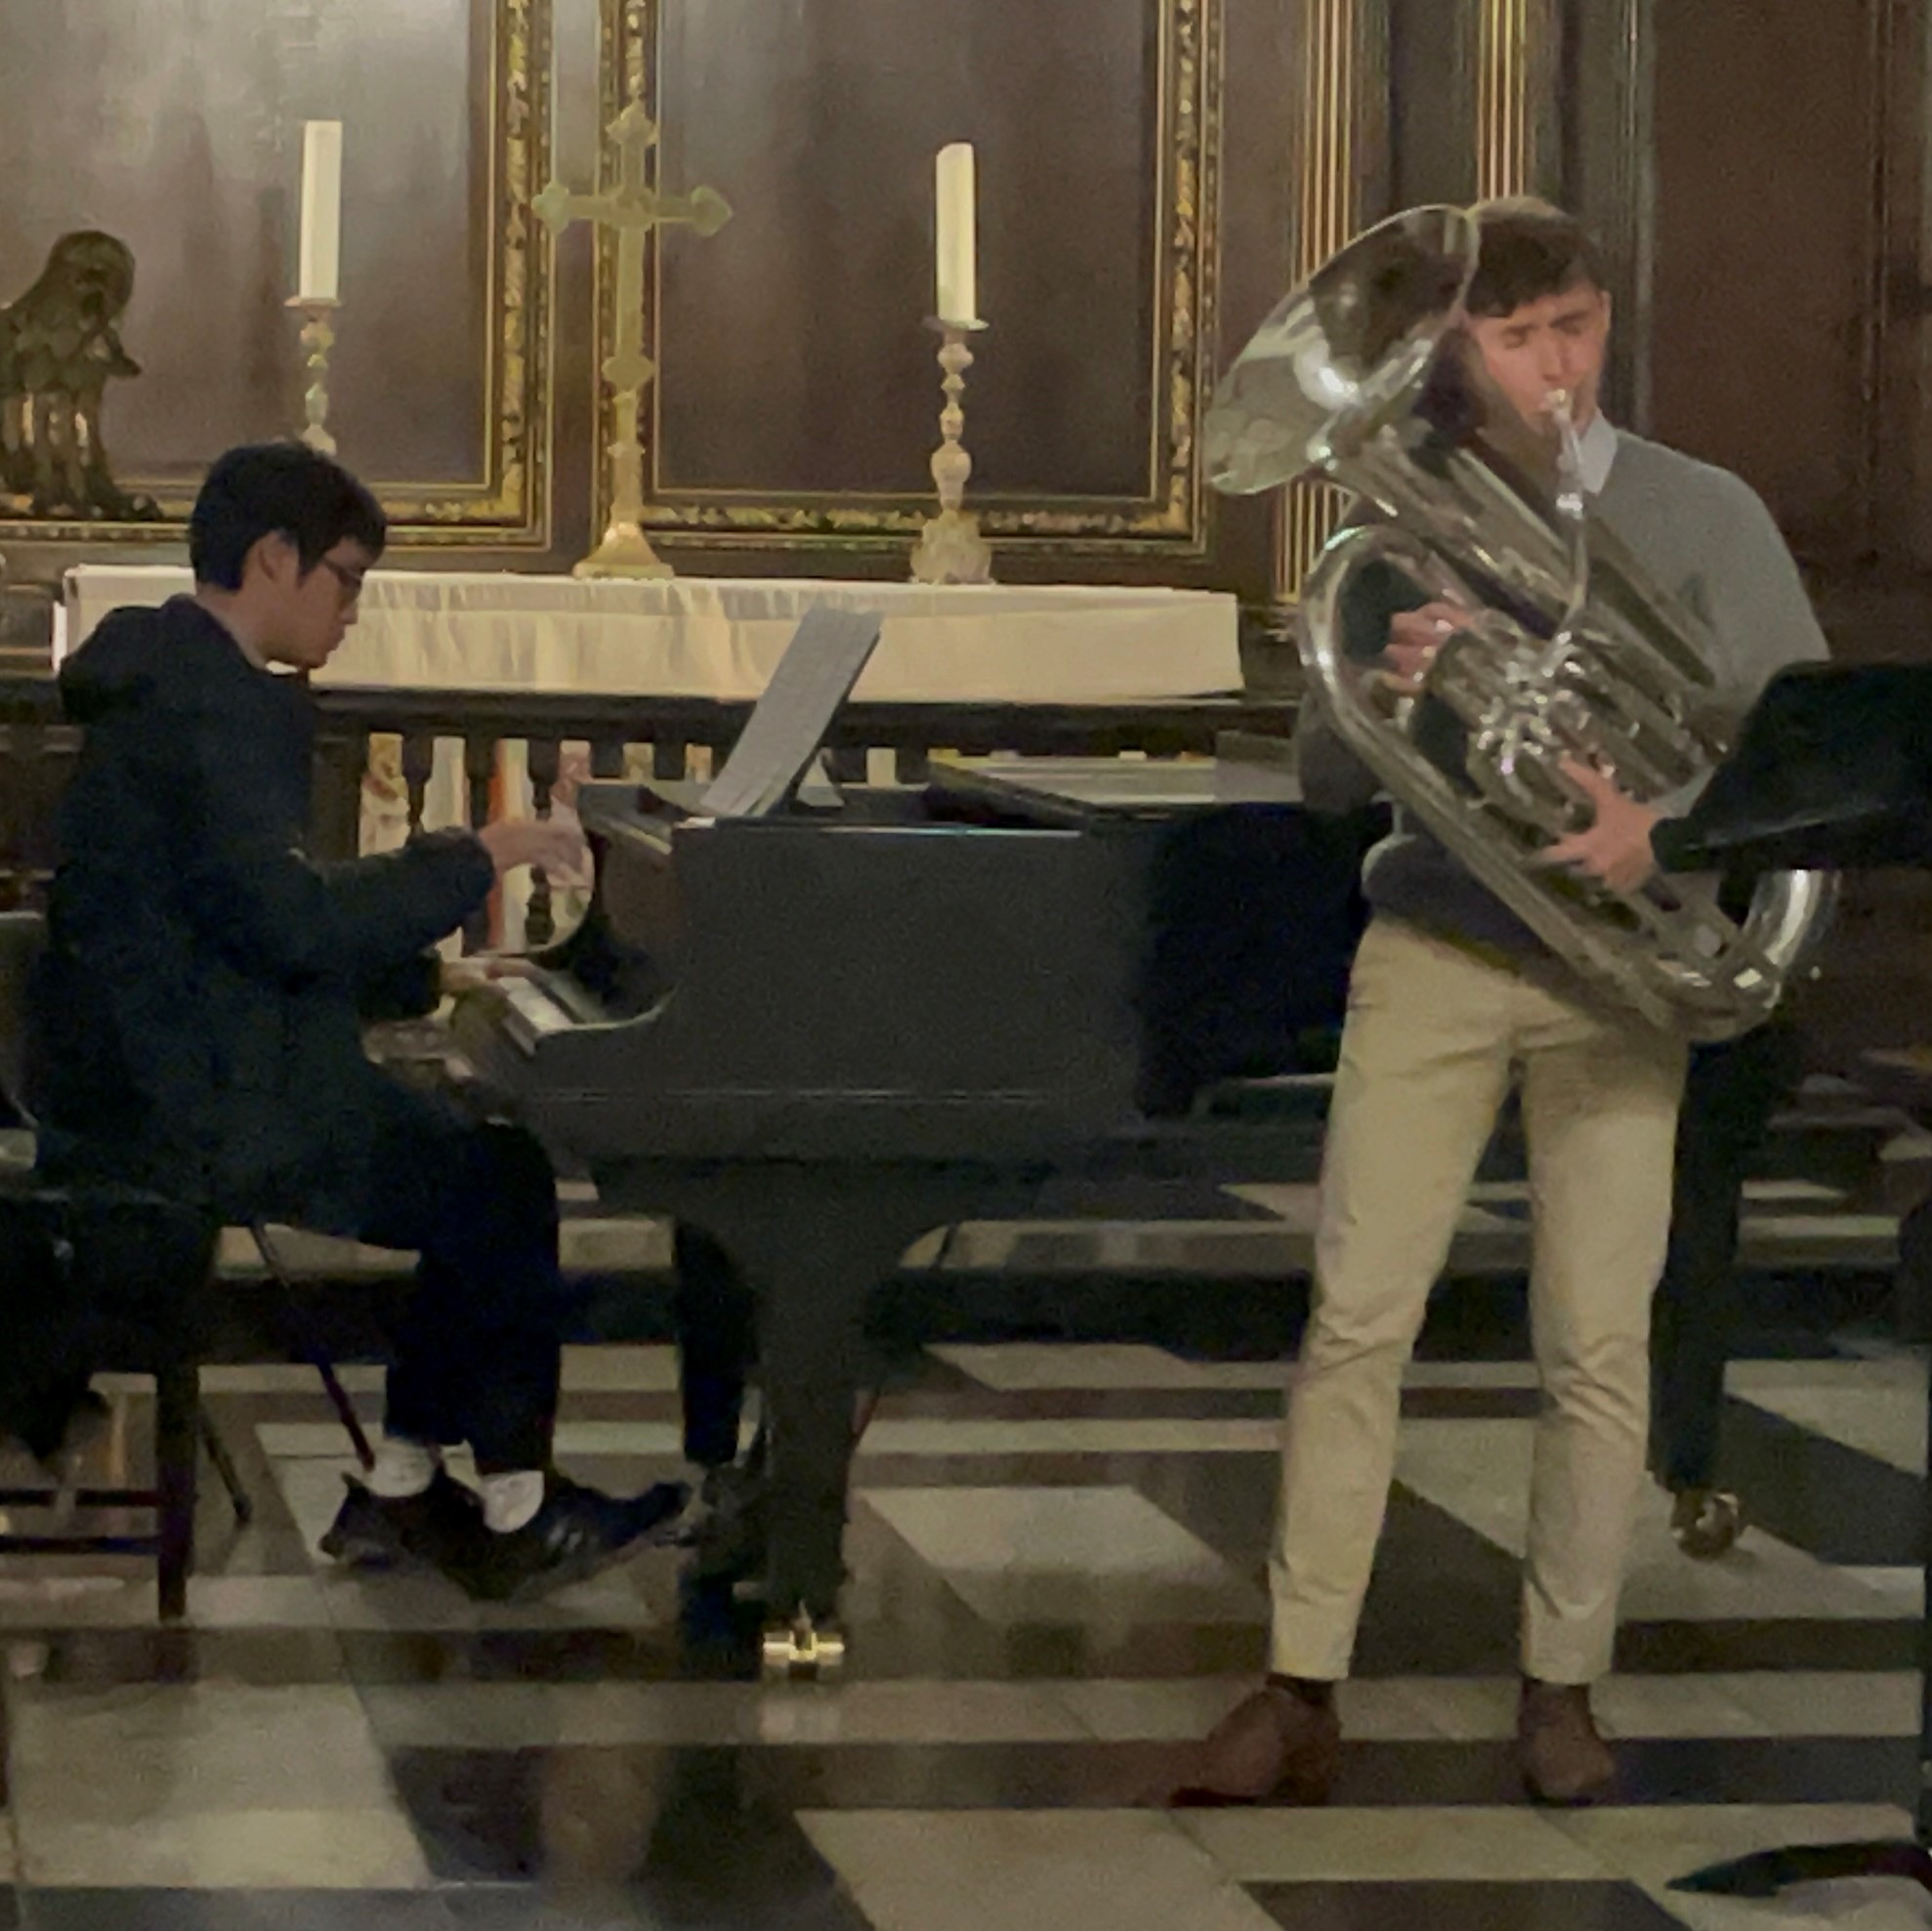 Pianist and brass players